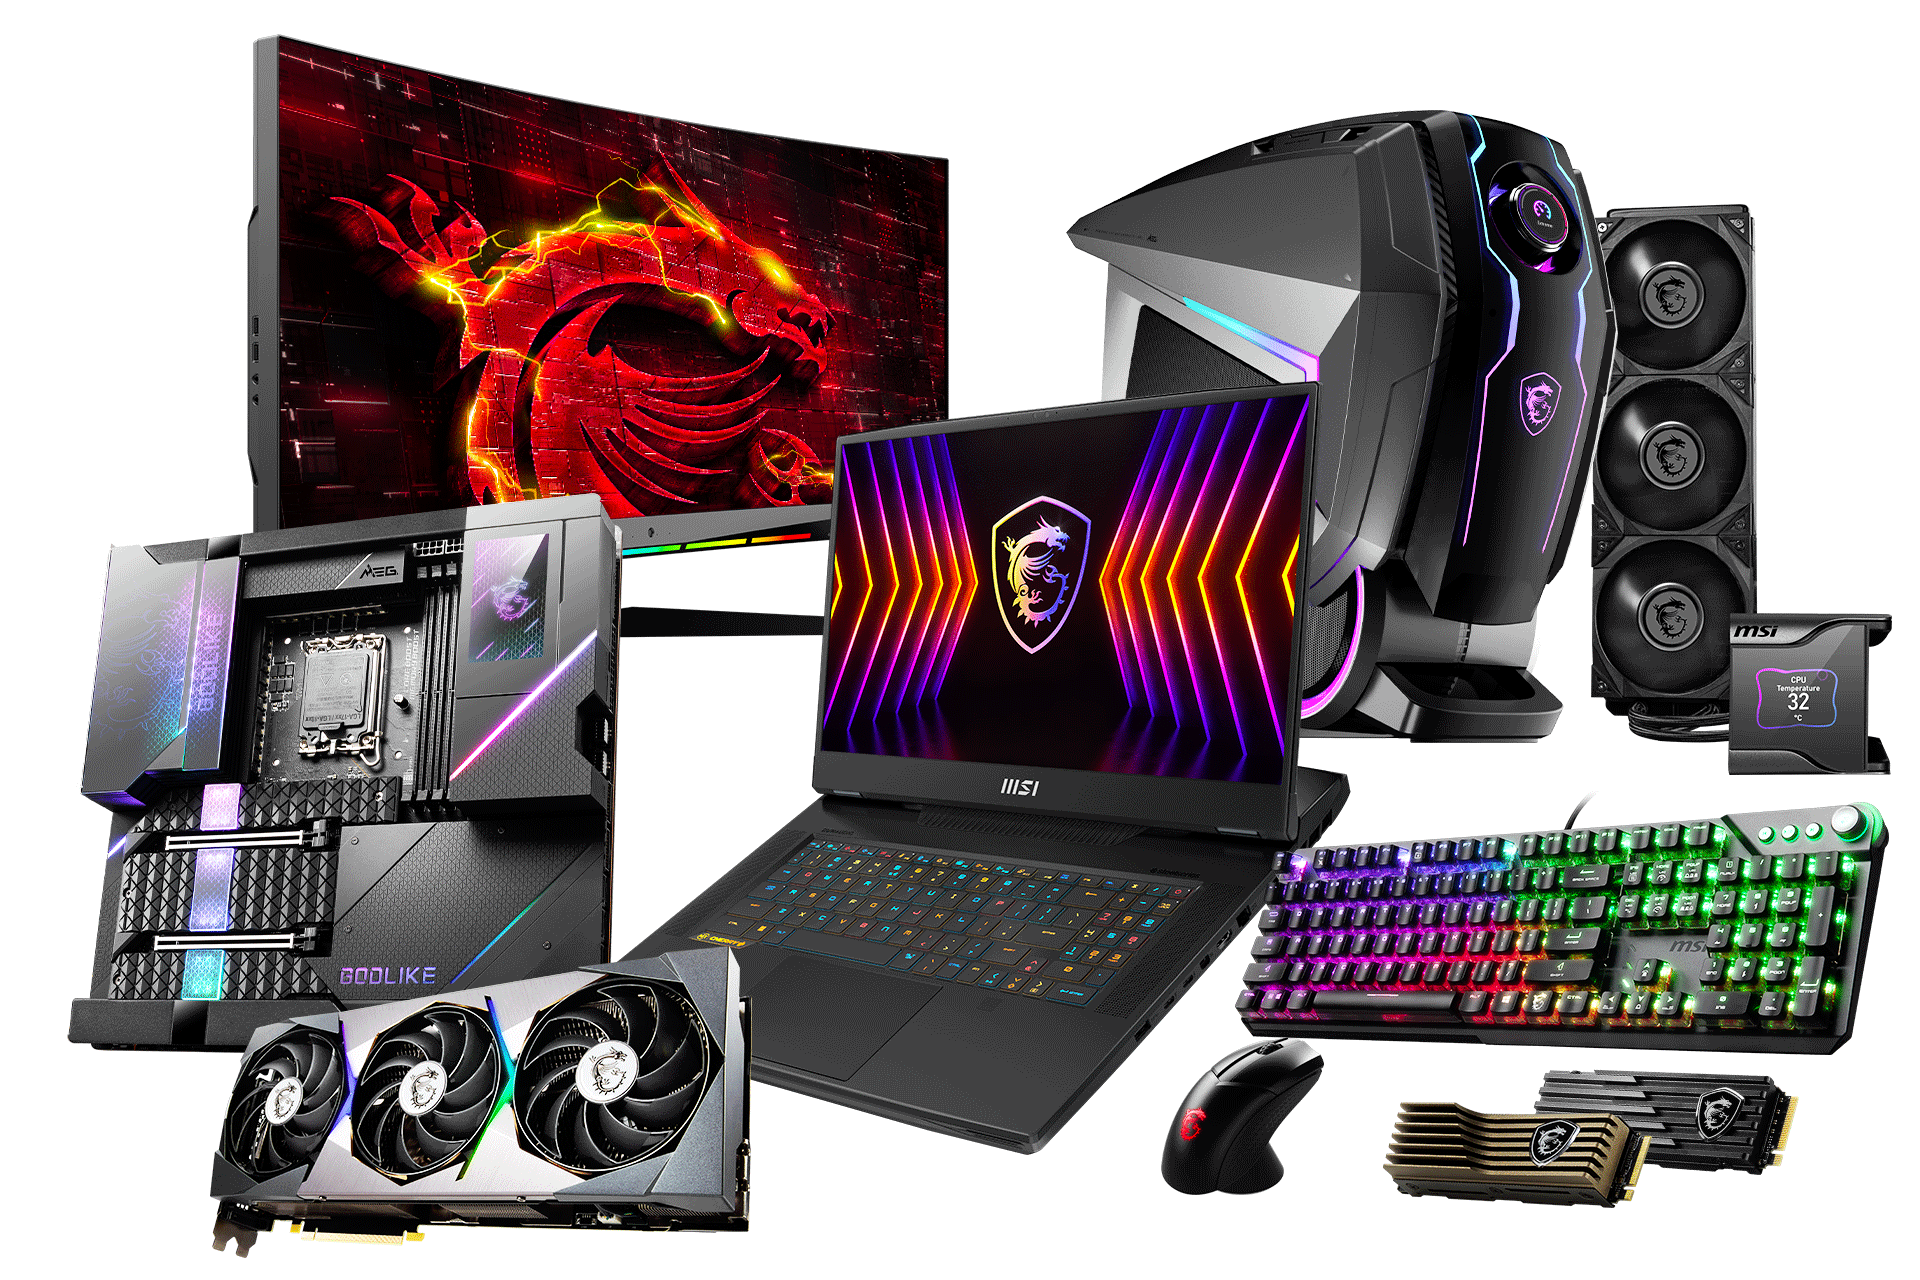 Collage of technical gaming devices